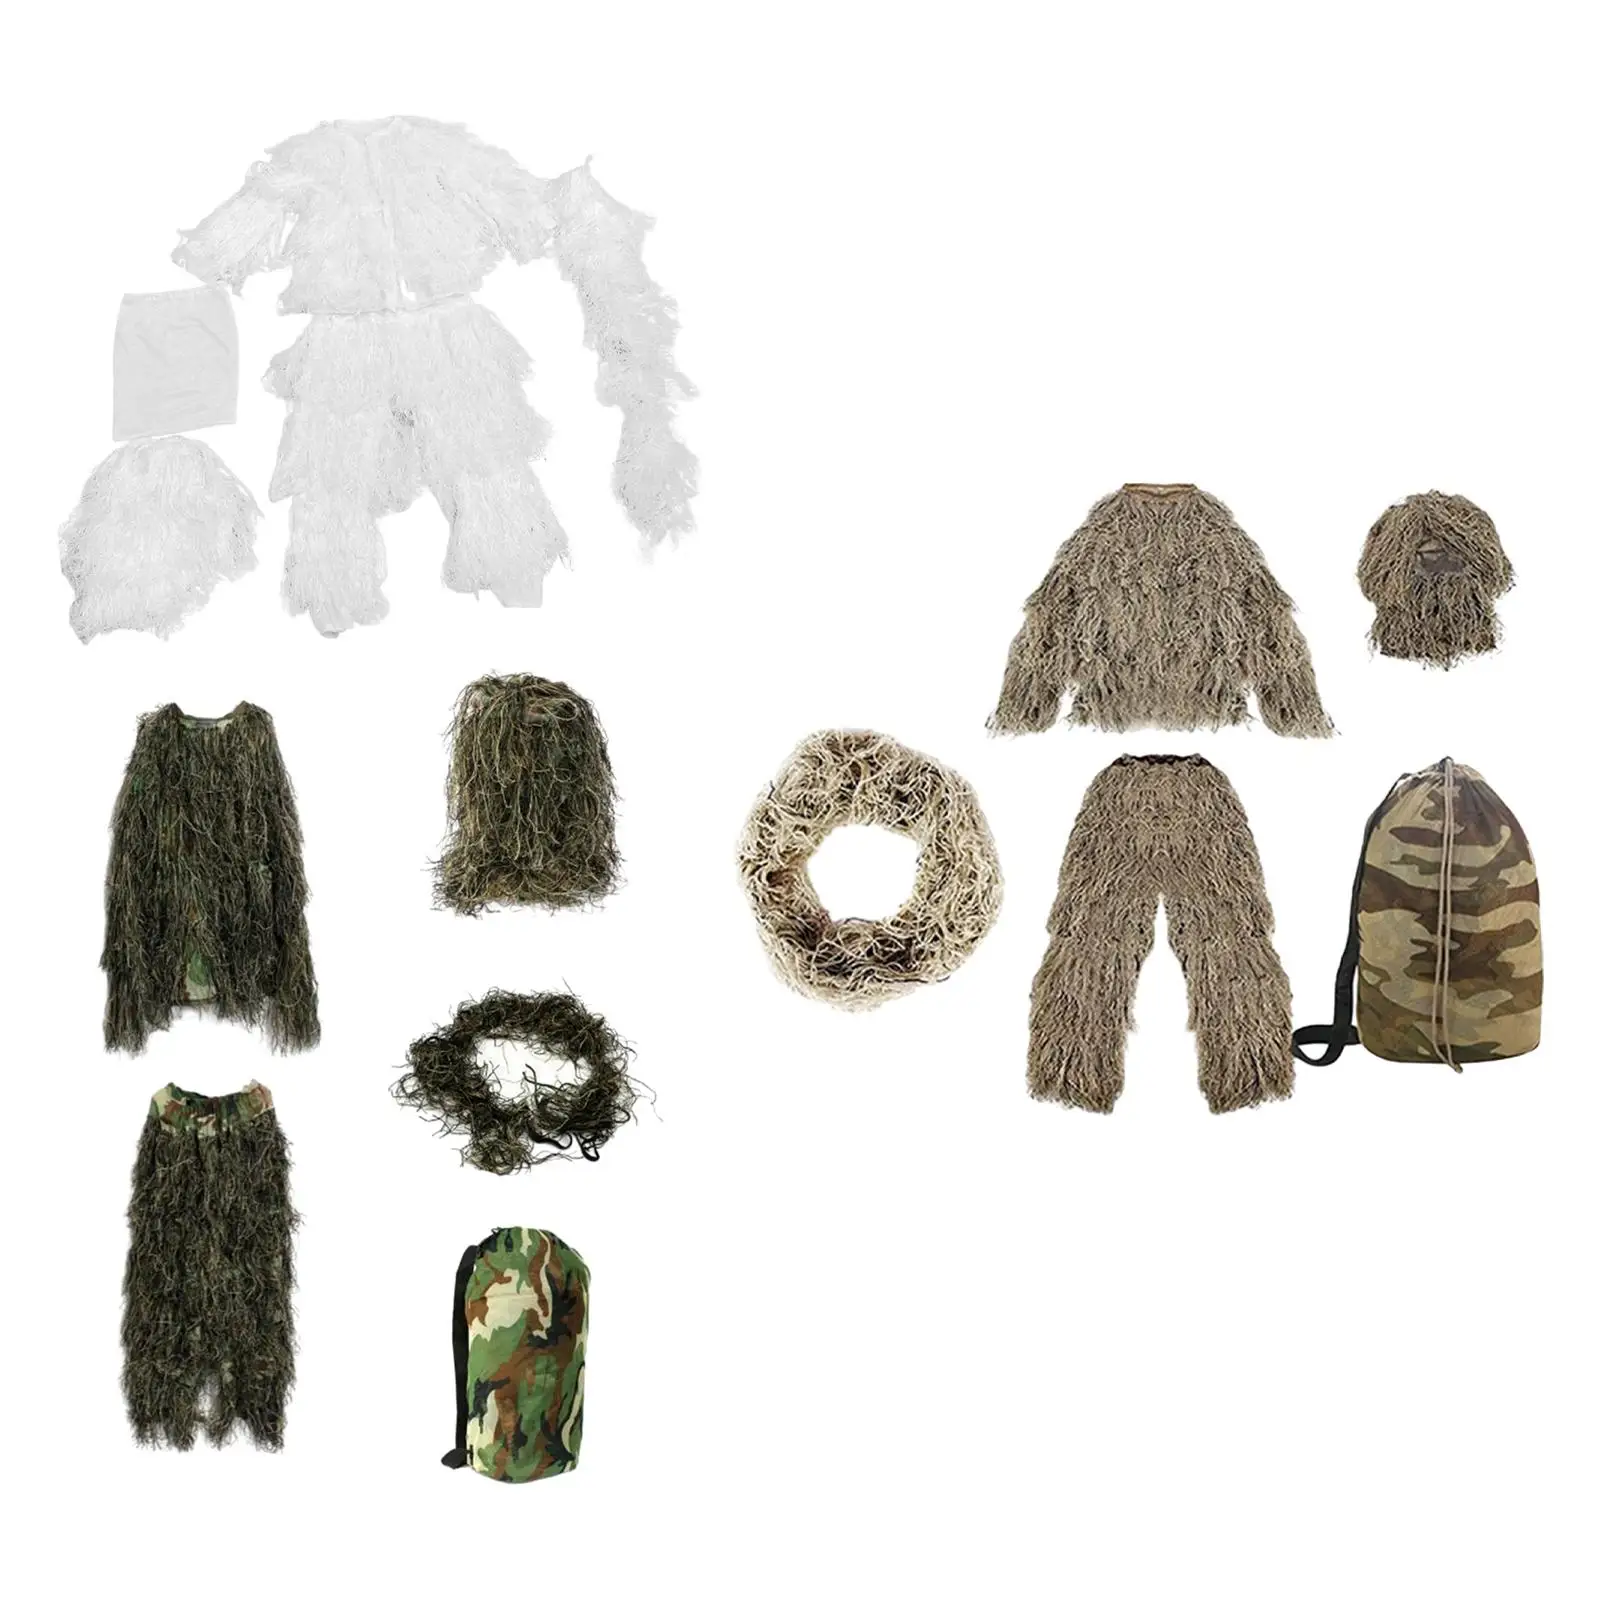 Kids Ghillie Suit Pants Woodland Apparel Fancy Dress Clothes Outfit Clothing for Game Bird Watching Jungle Camping Accessories